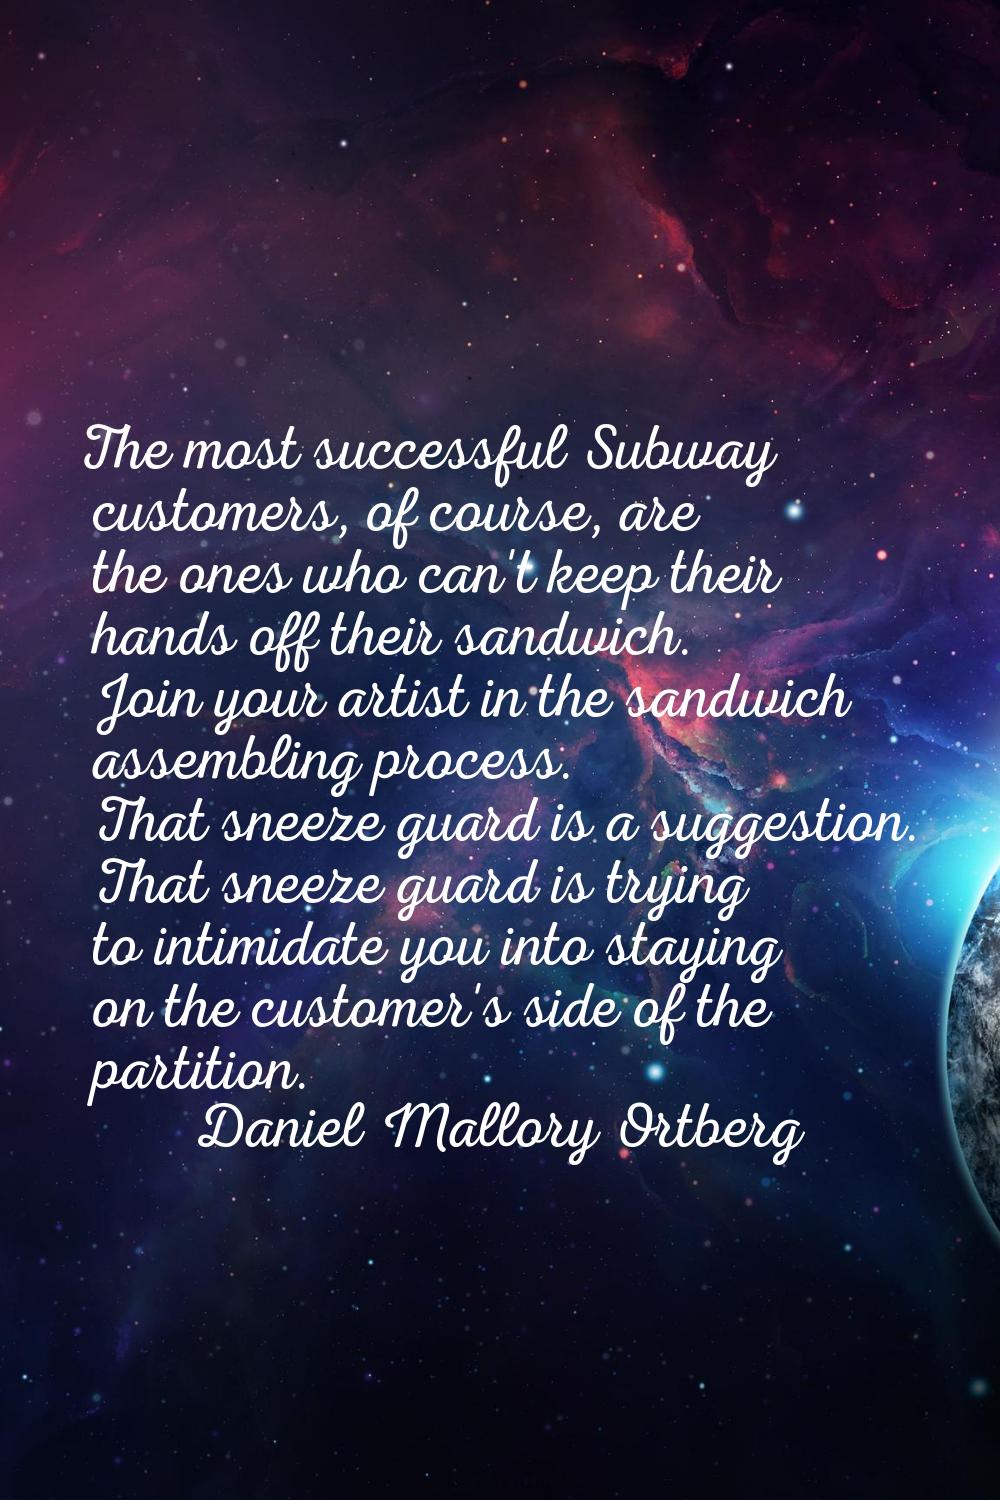 The most successful Subway customers, of course, are the ones who can't keep their hands off their 